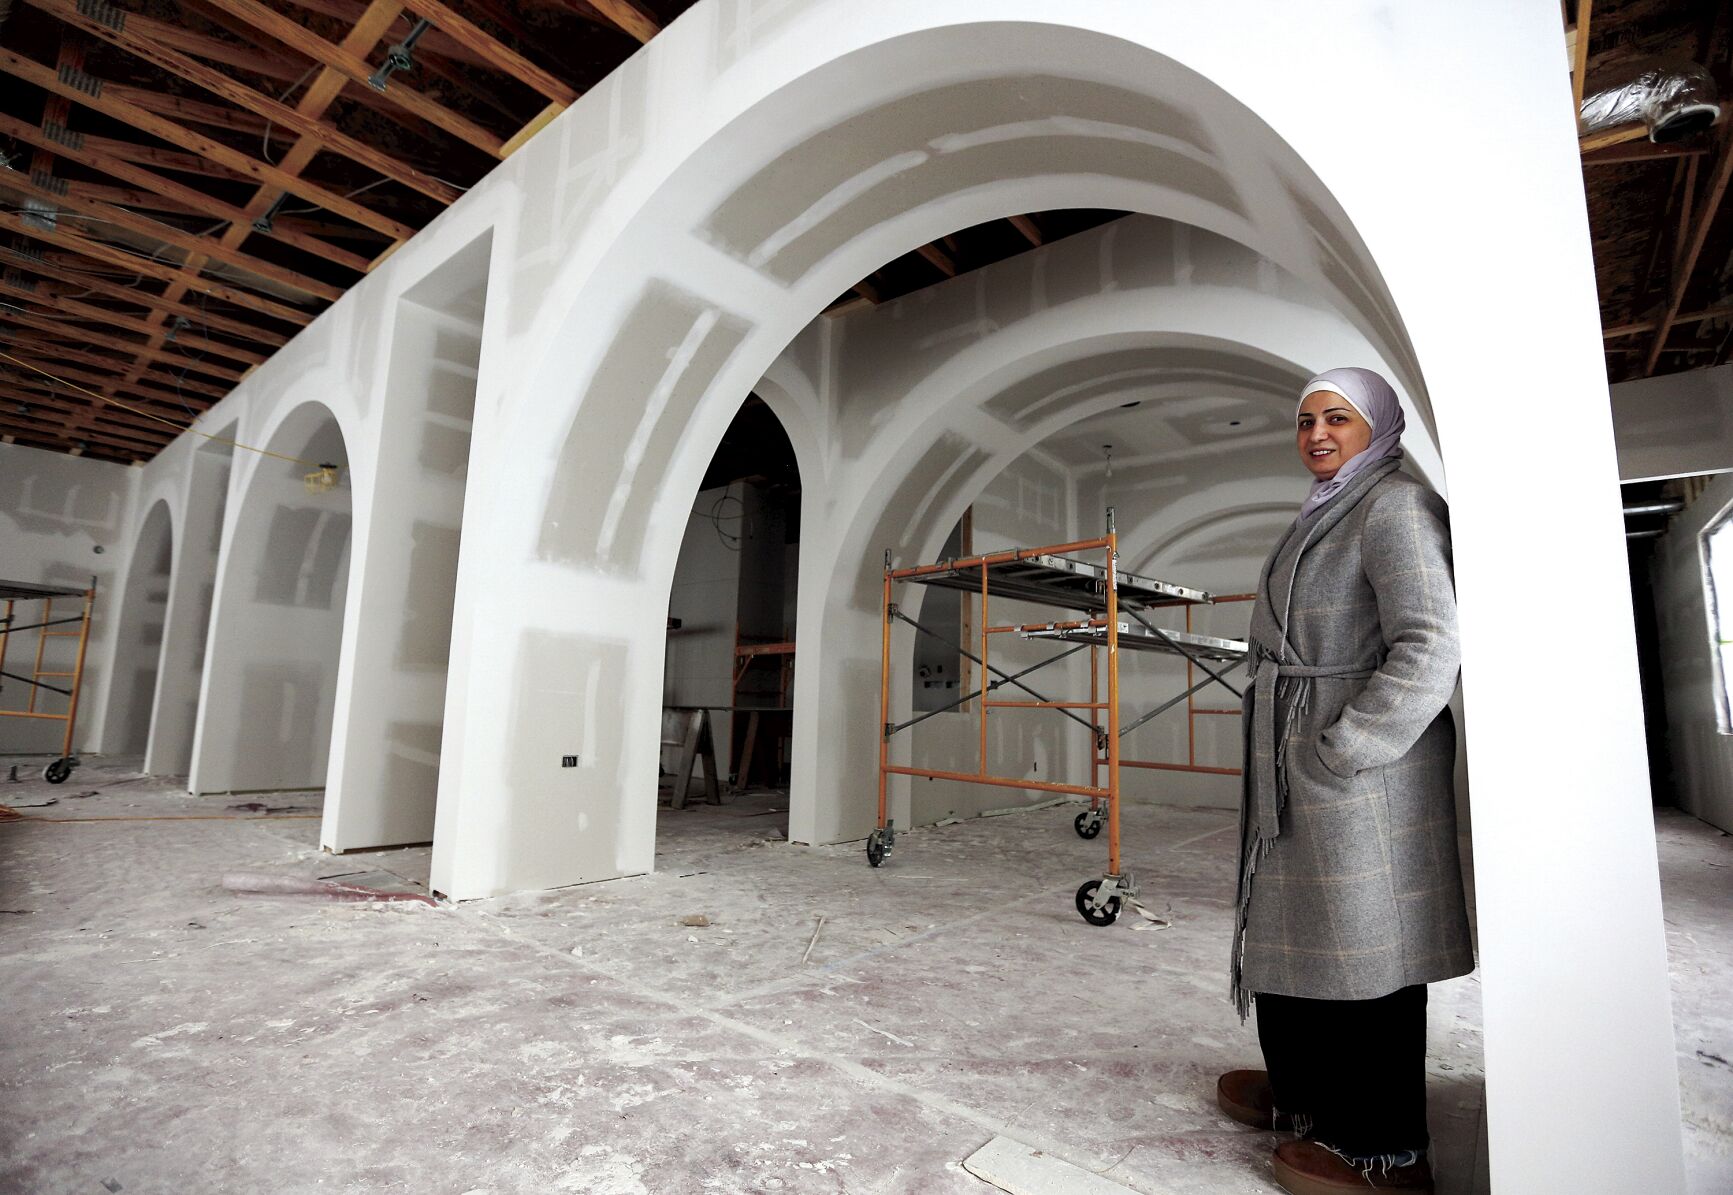 Co-owner Yaman Salim shows the remodeling progress on Roses & Berries Cafe, which is set to open at the end of January at 4340 Asbury Road. The cafe will include a mix of Middle Eastern dishes and French pastries.    PHOTO CREDIT: Dave Kettering